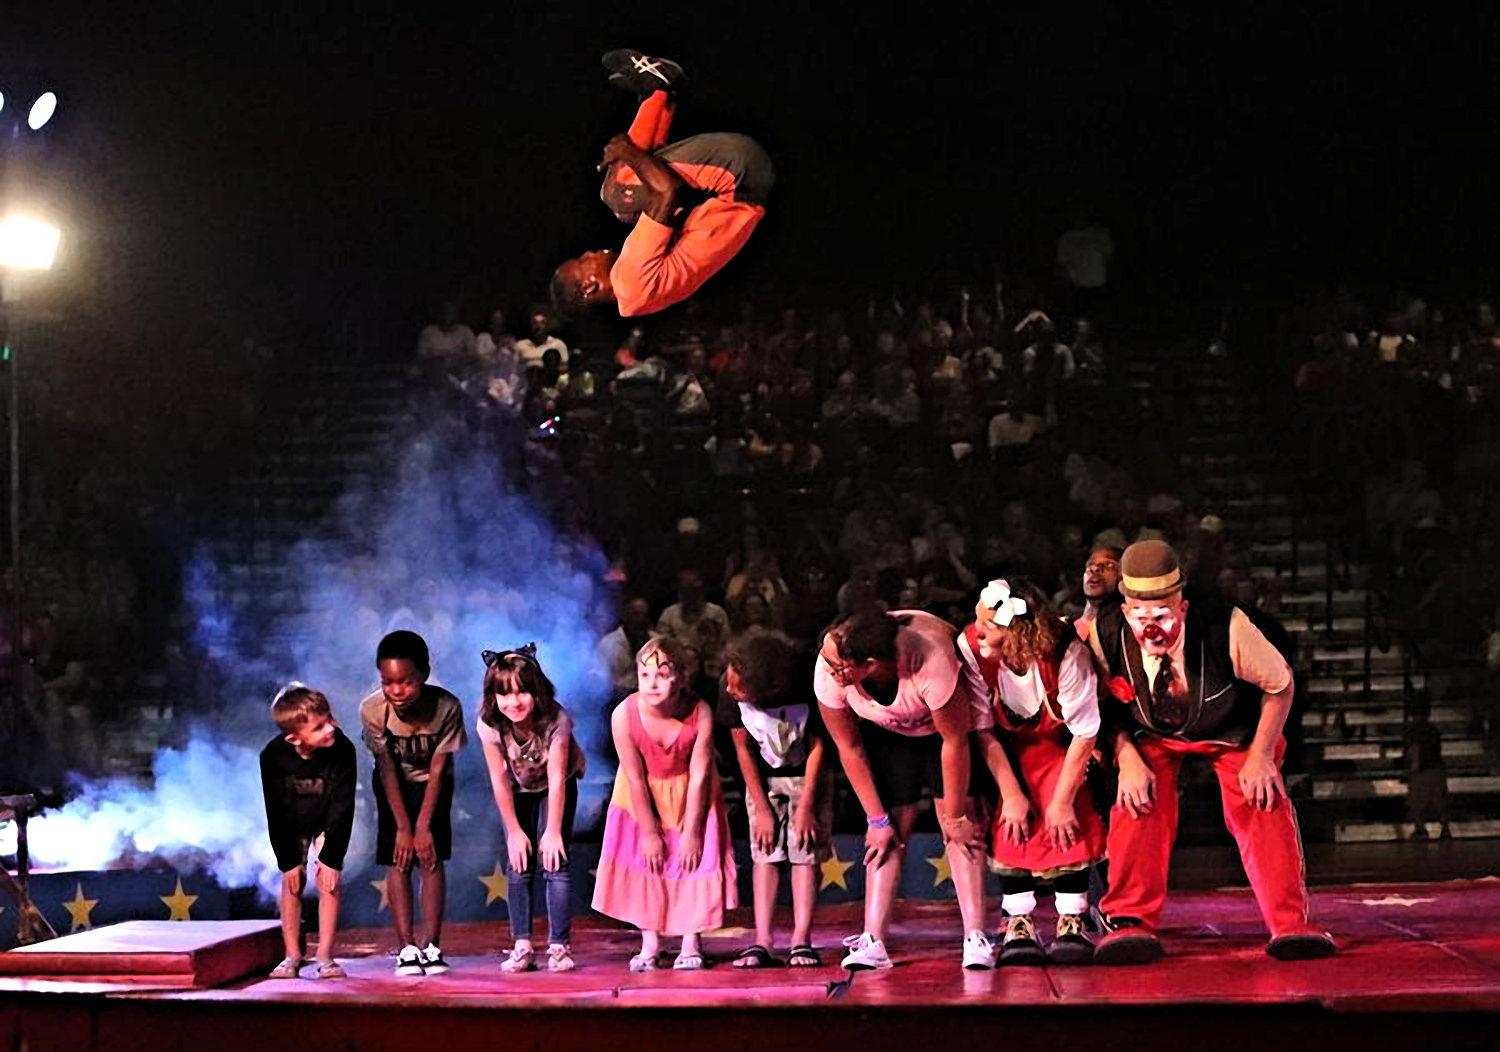 Loomis Bros. Circus : 2021 Tour - July 2, 3, and 4 in Gaffney, SC at the Grassy Pond Arena, Cherokee, South Carolina, United States